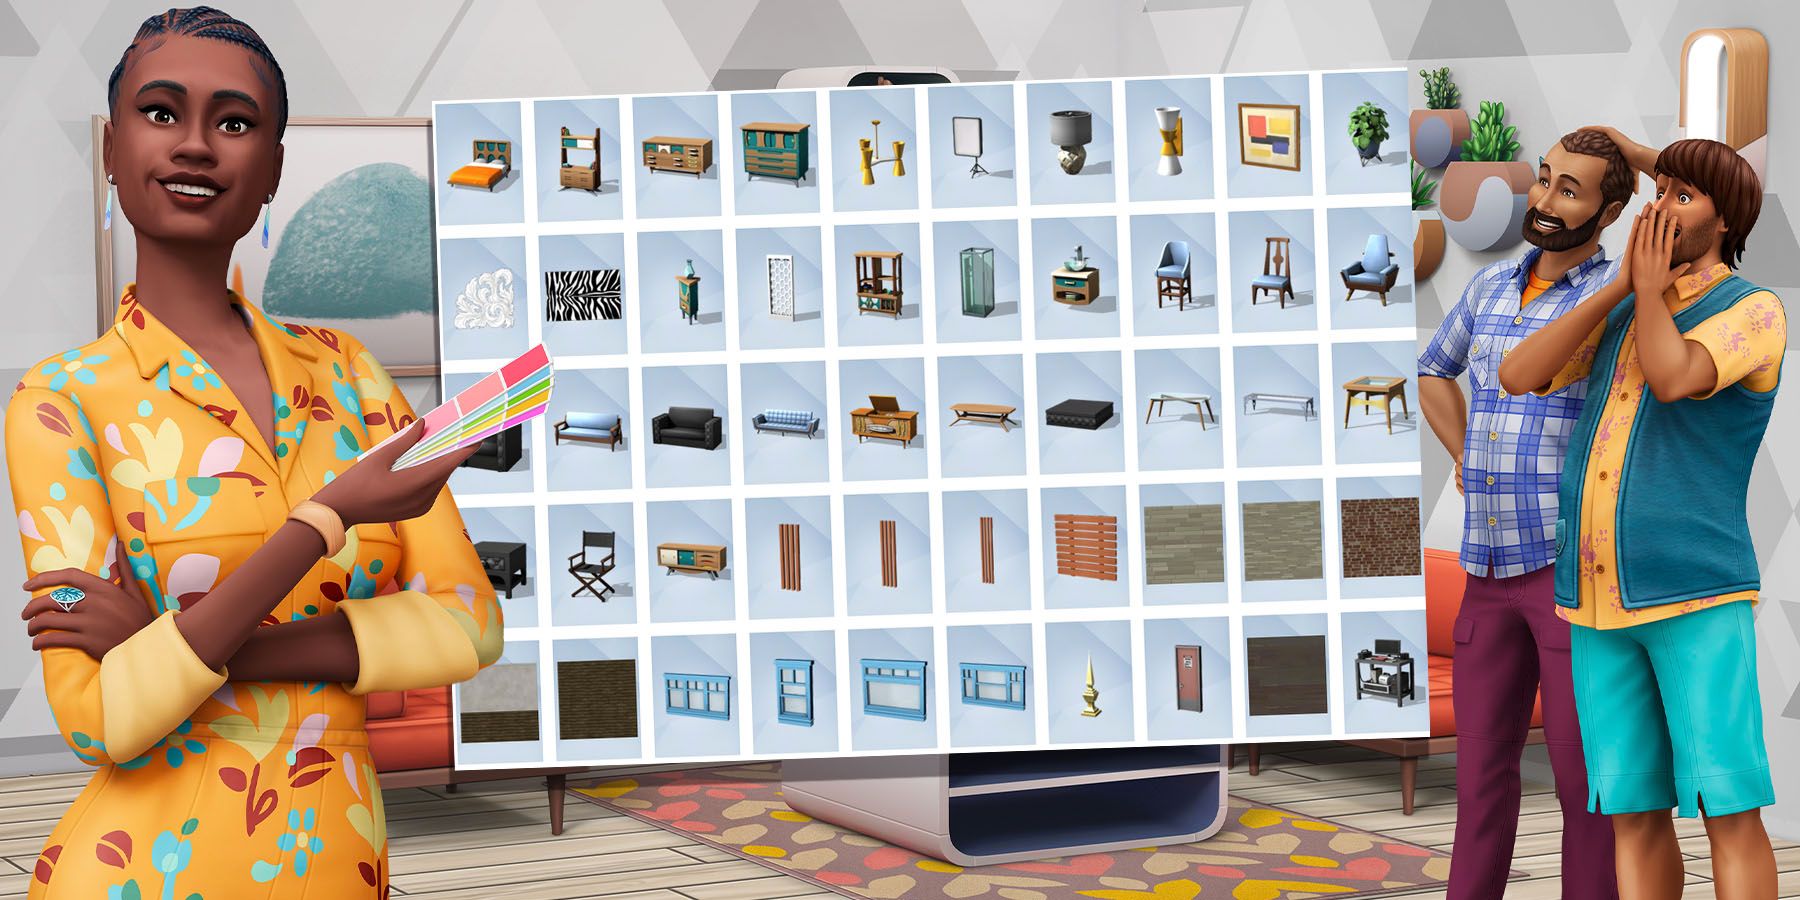 Here's How to Unlock 'The Sims 4' Cheats on Xbox